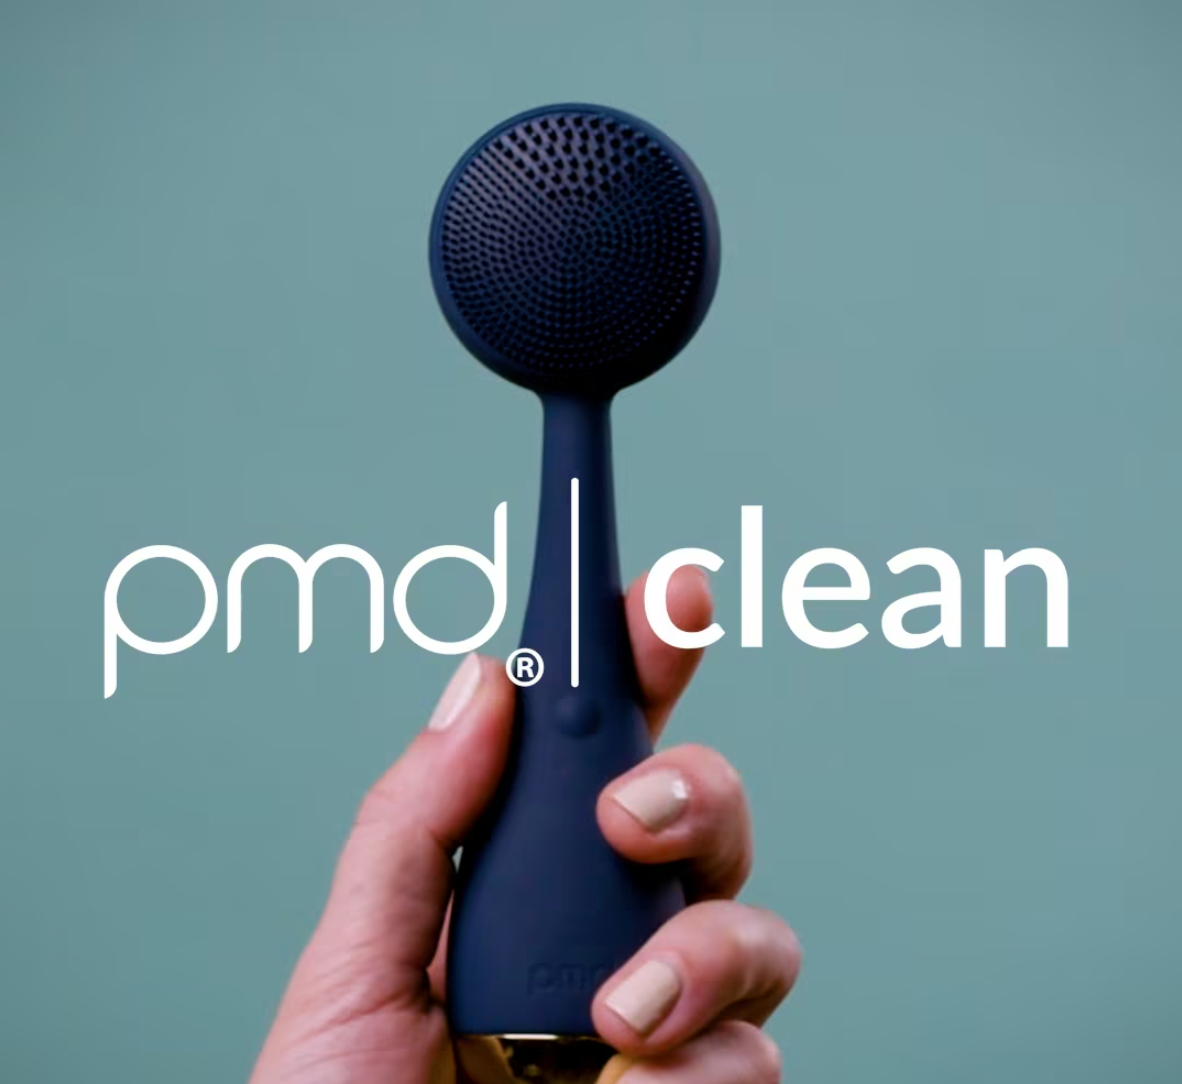 4001-Grey?Meet the PMD Clean